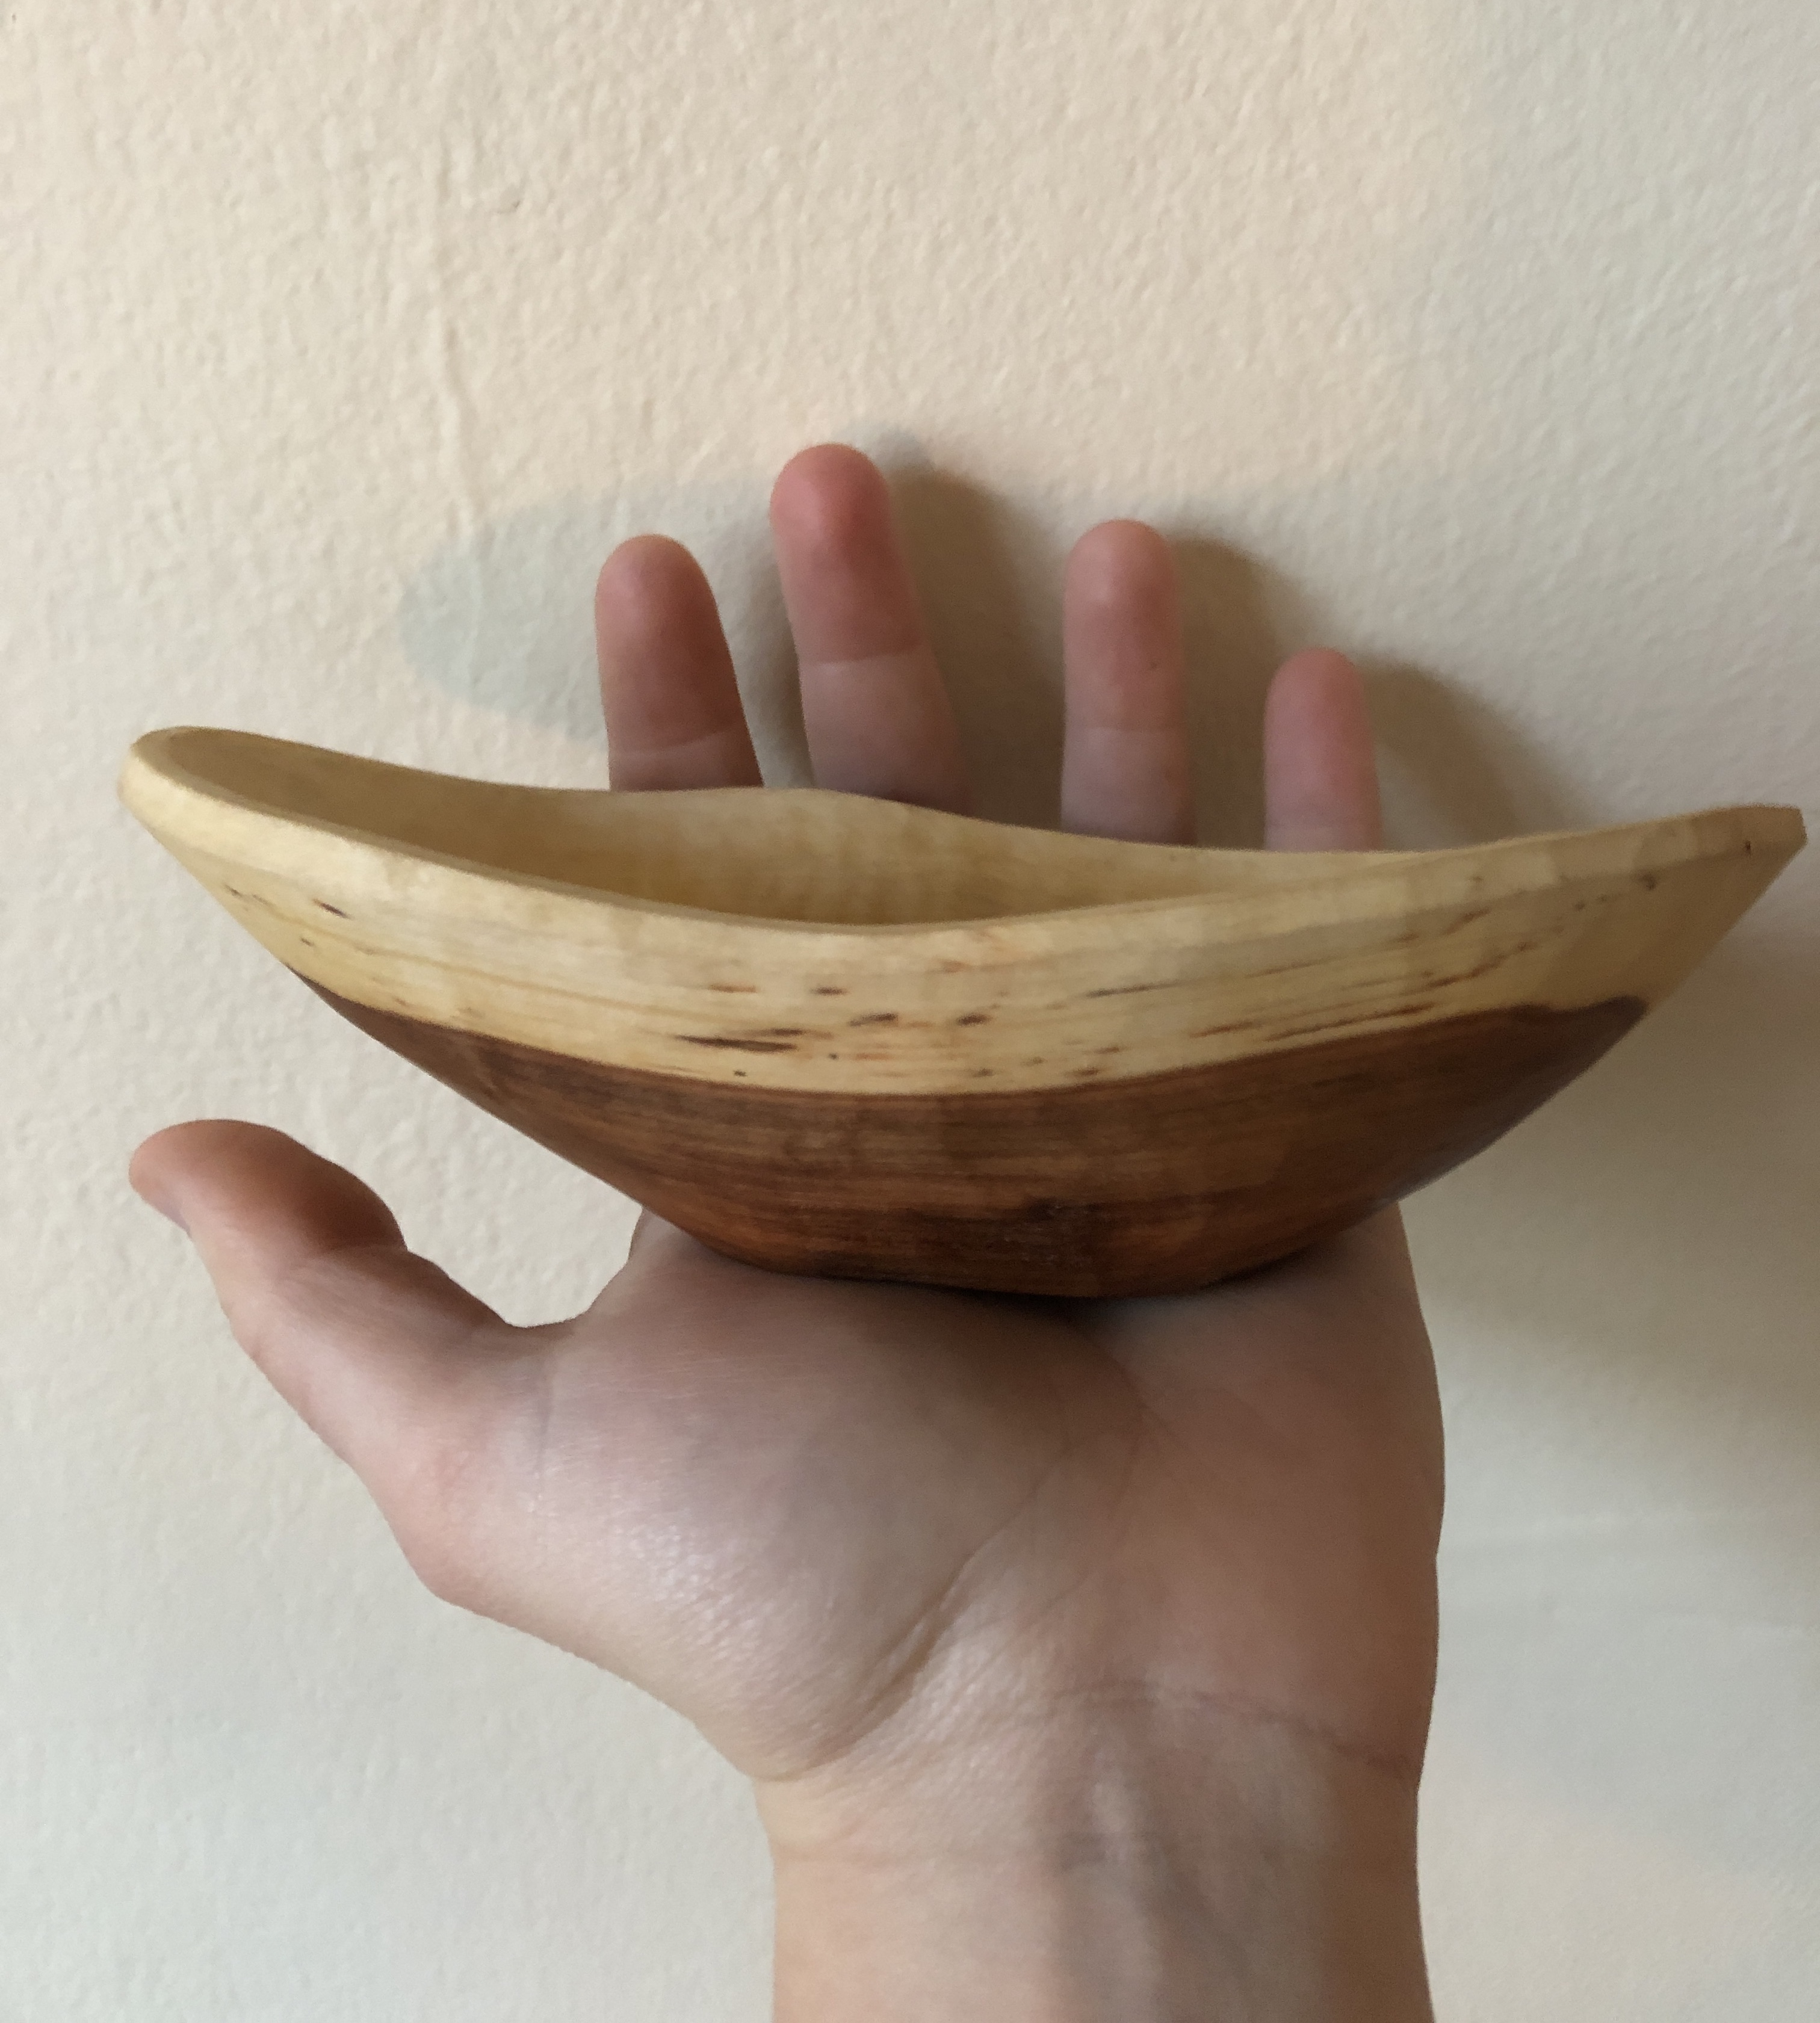 Two tones Applewood heart vessel held in a white palm